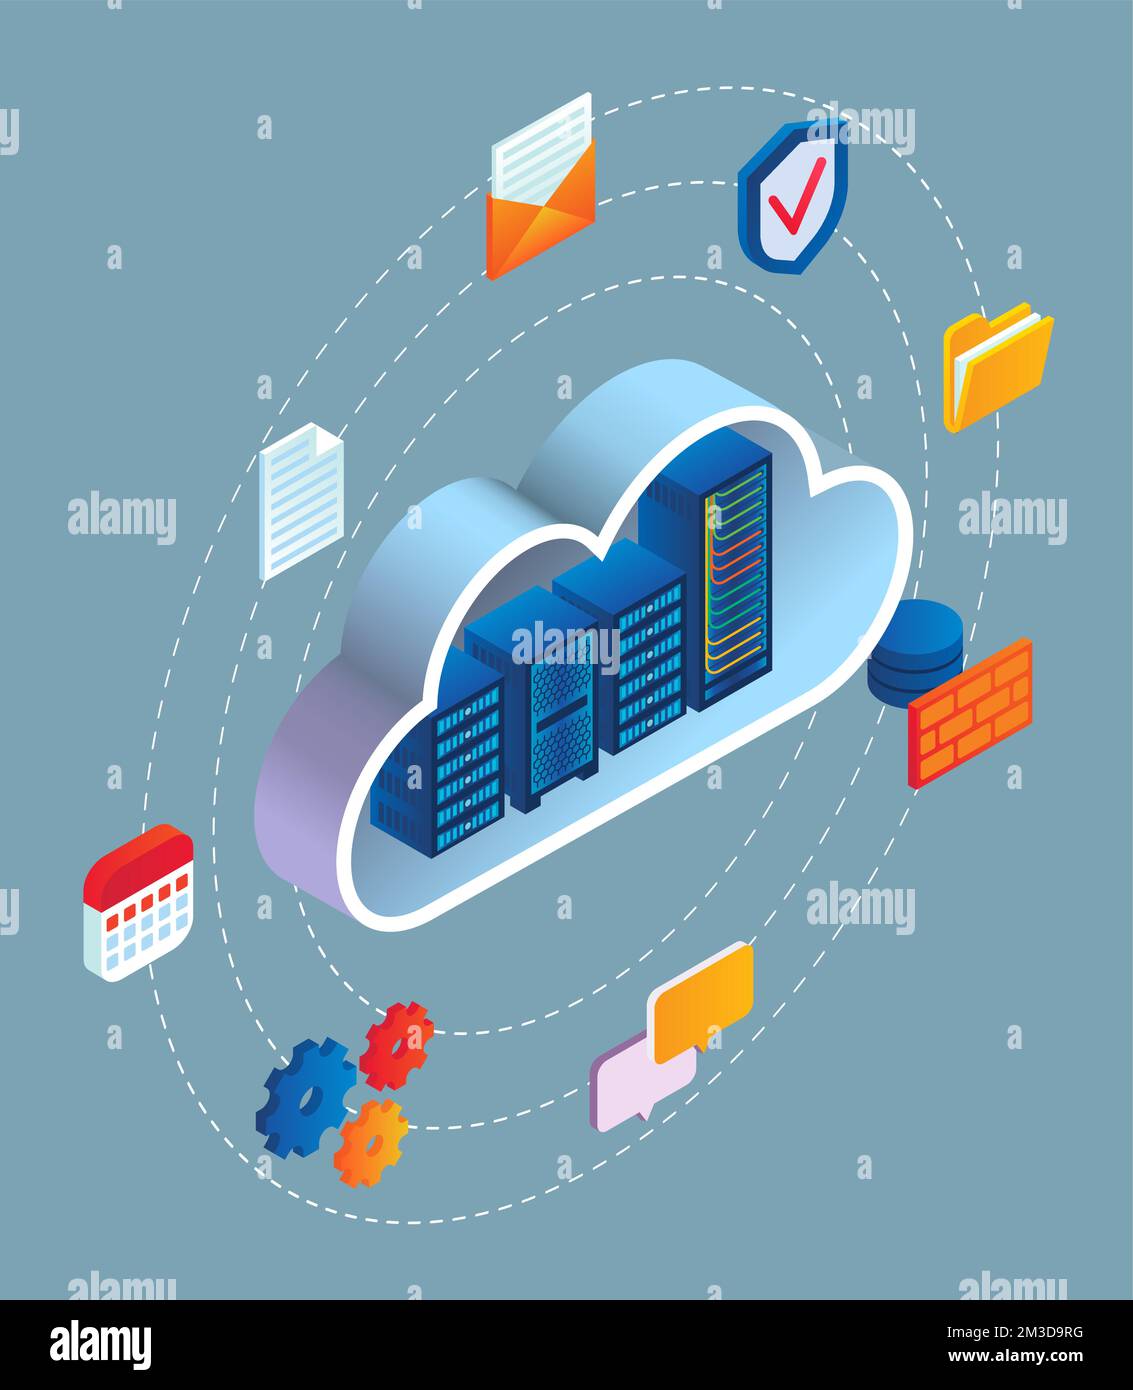 Cloud hosting service for virtual data storage Stock Vector